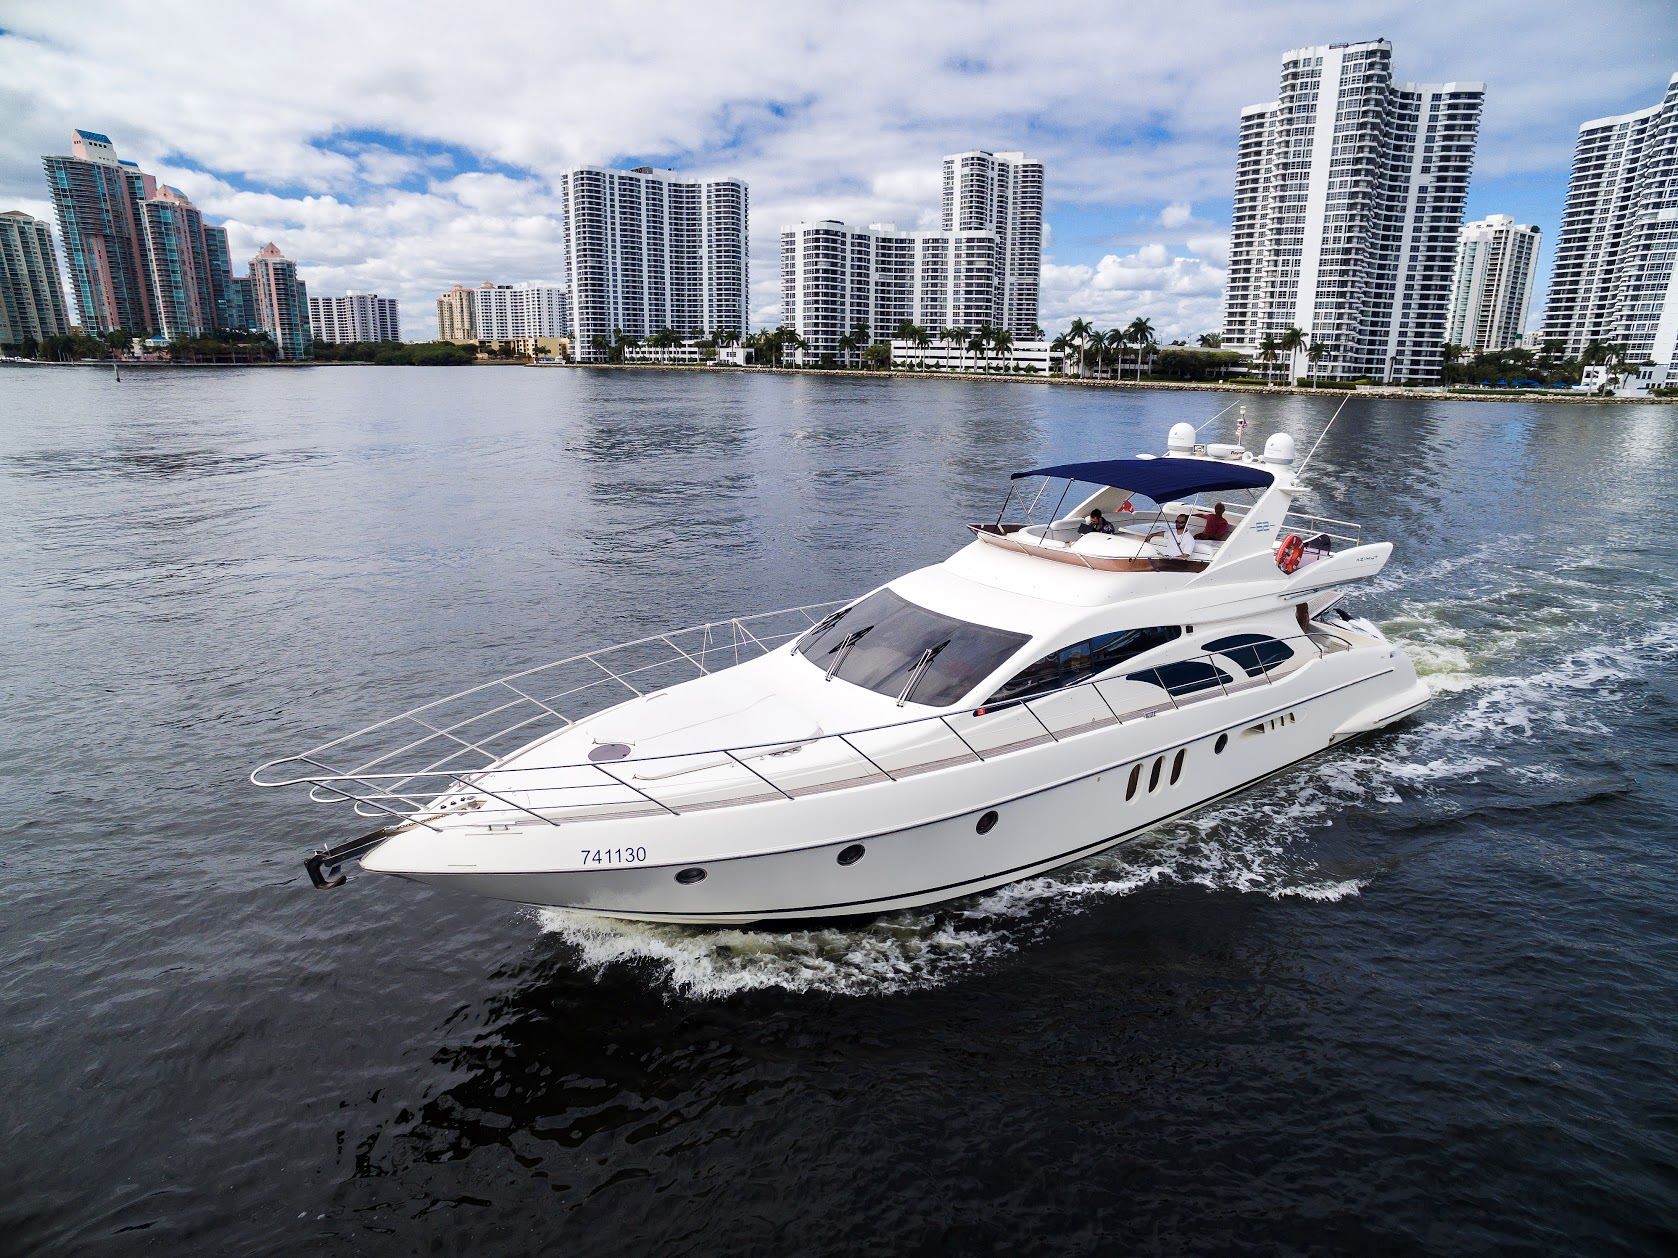 a&g miami yacht sale corp